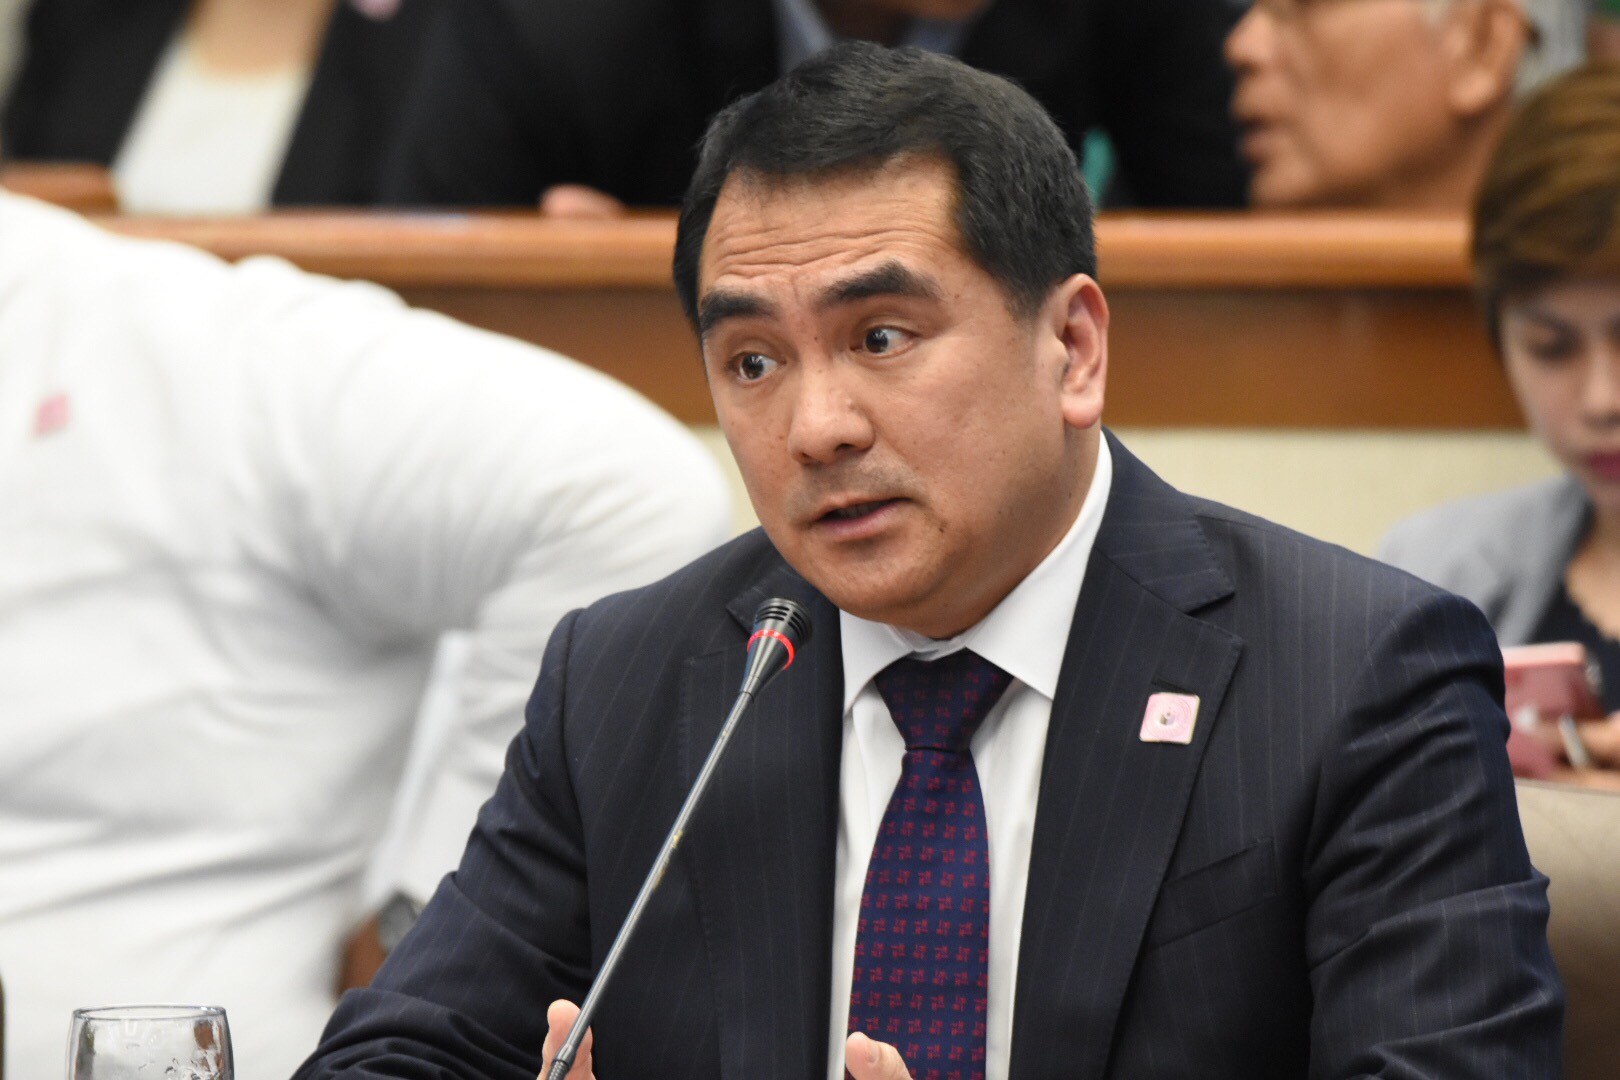 EMBATTLED. UST Law Dean Nilo Divina faces a disbarment complaint, the latest of his legal battles related to Patricia Bautista's exposé of the alleged unexplained wealth of Comelec Chairman Andres Bautista, a close friend. Photo by Angie de Silva/Rappler  